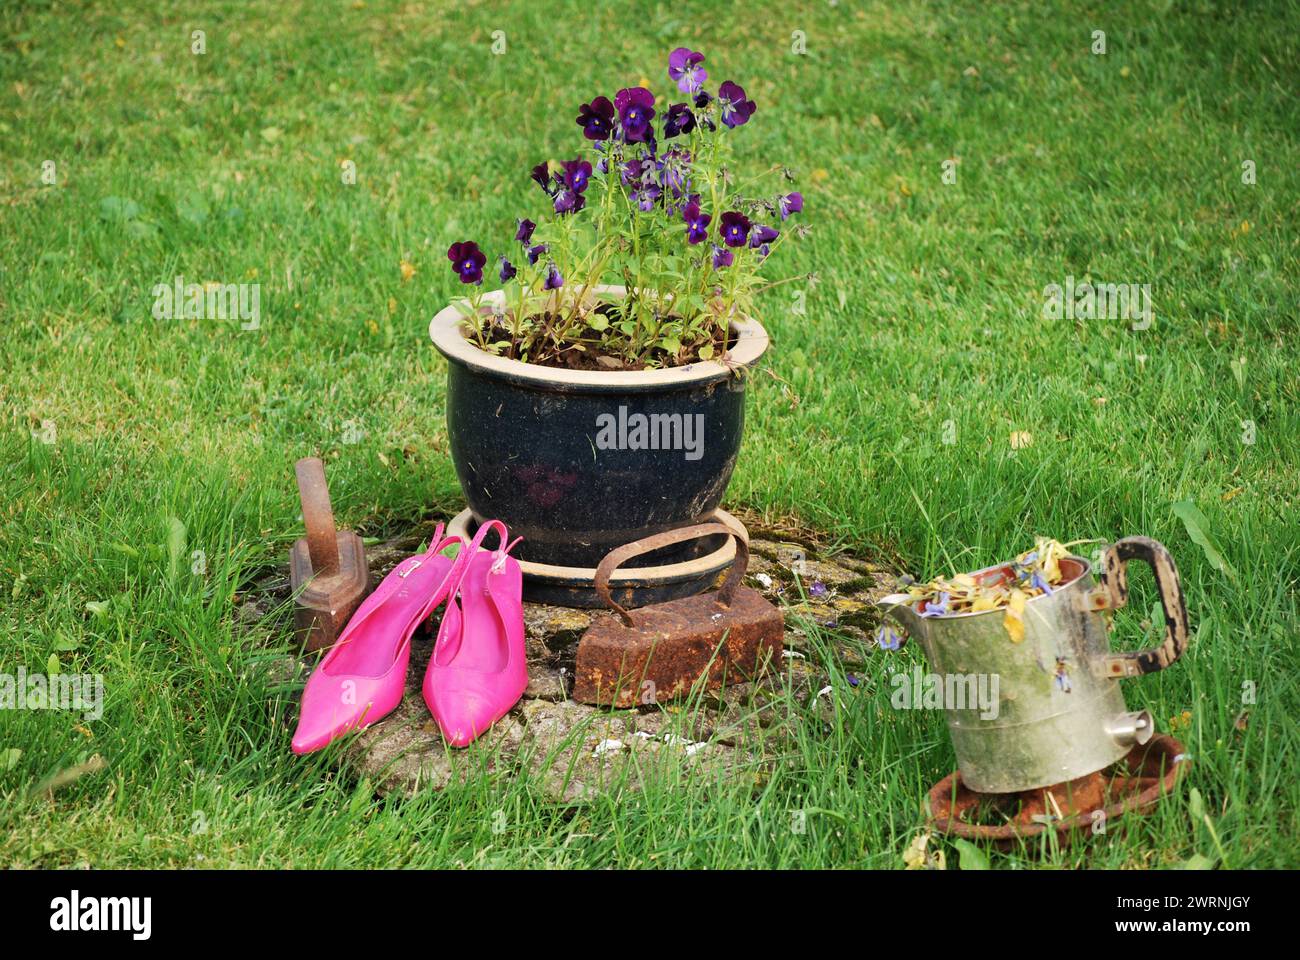 pink slippers on the lawn with flower pot Stock Photo